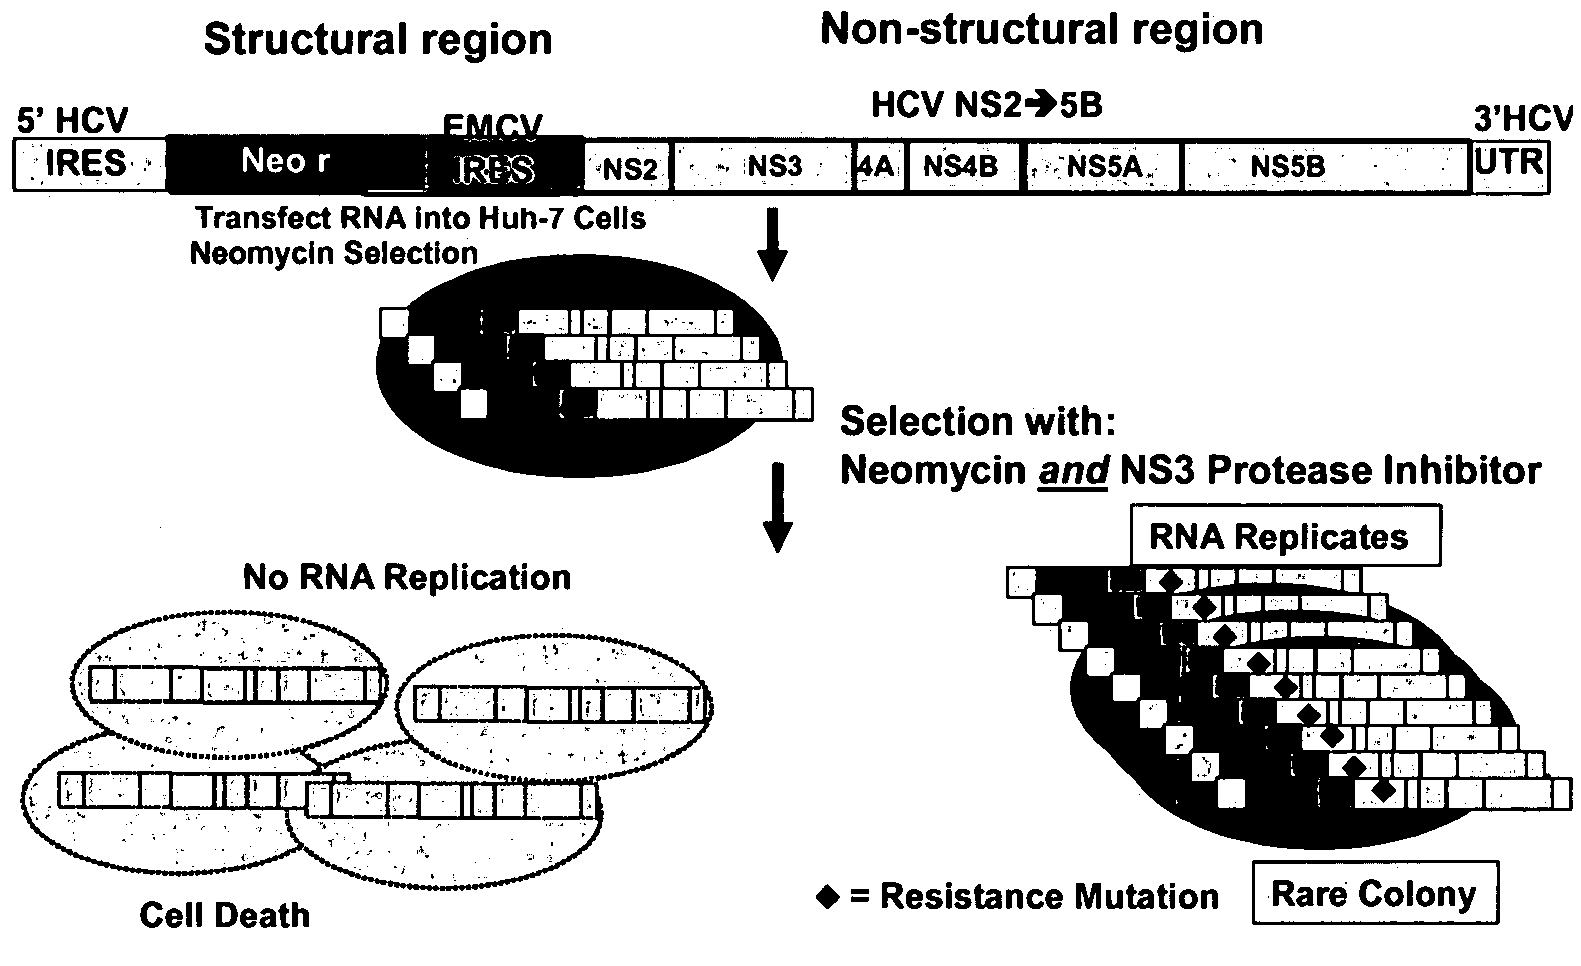 Inhibitor-resistant HCV NS3 protease